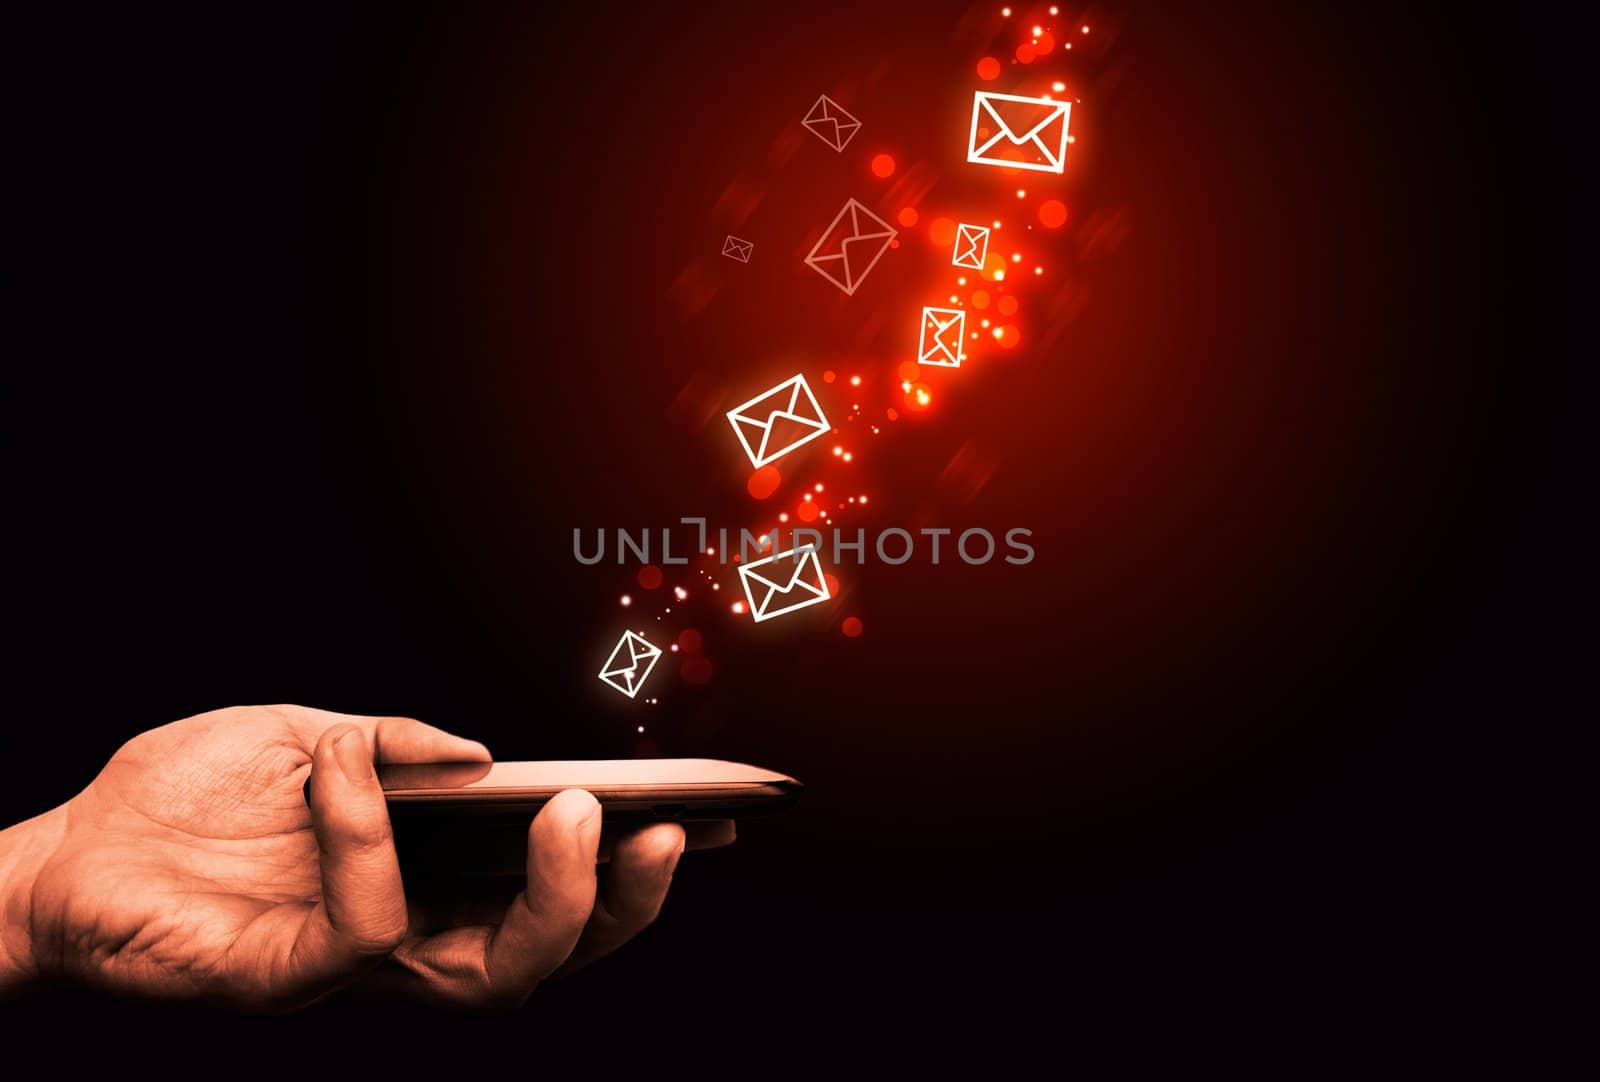 Abstract, touching mobile phone, flying envelopes, fire effect